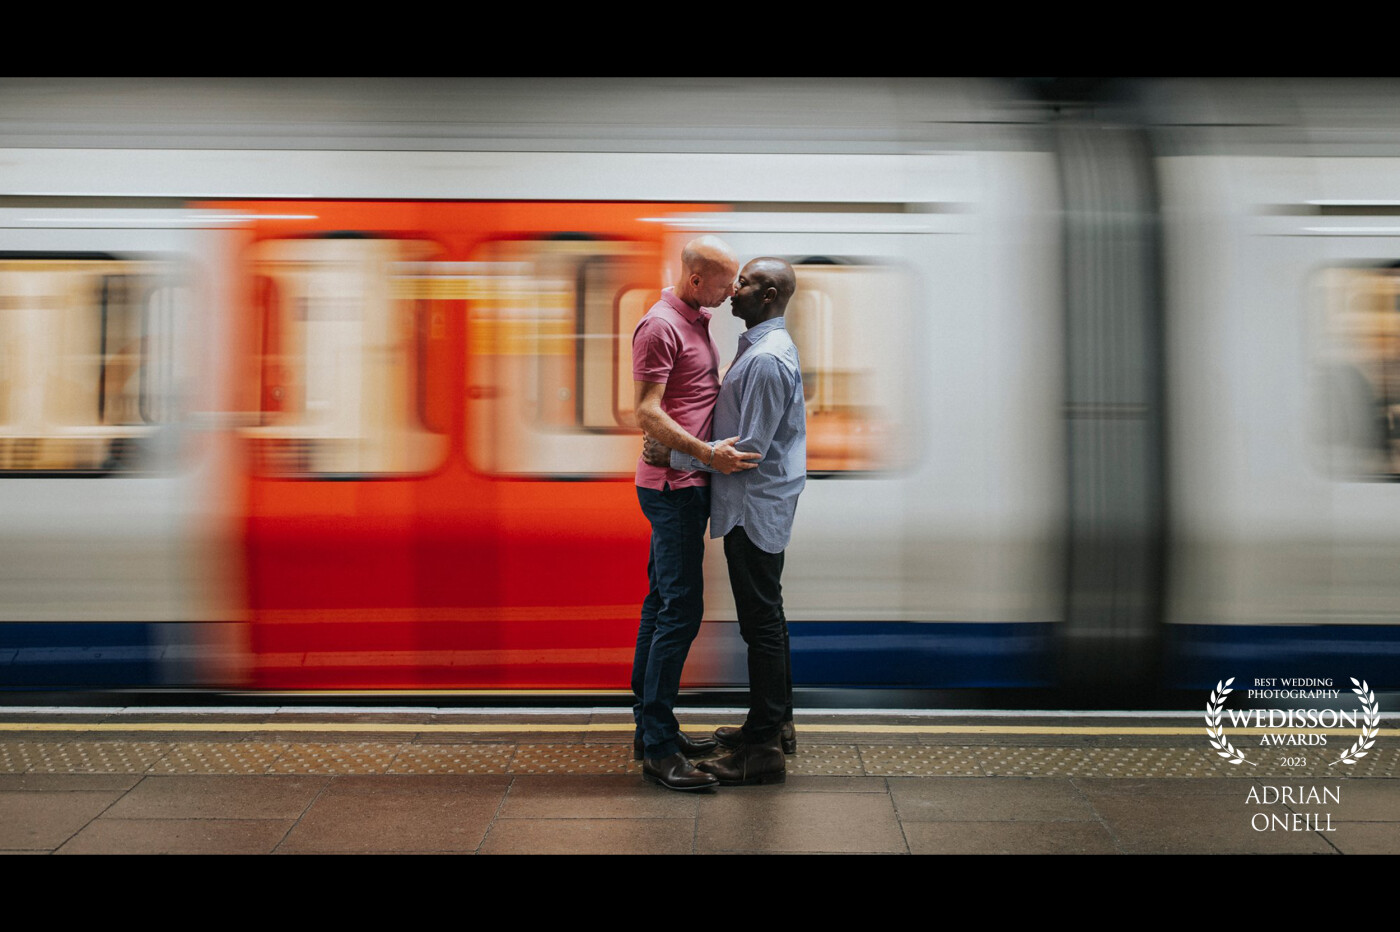 When I get asked to do a wedding in London I always take the couple for a little pre shoot. For this shot I wanted to incoperate the London Underground...managed to get a shot of the lads having a little moment whilst the train pasting in the background.